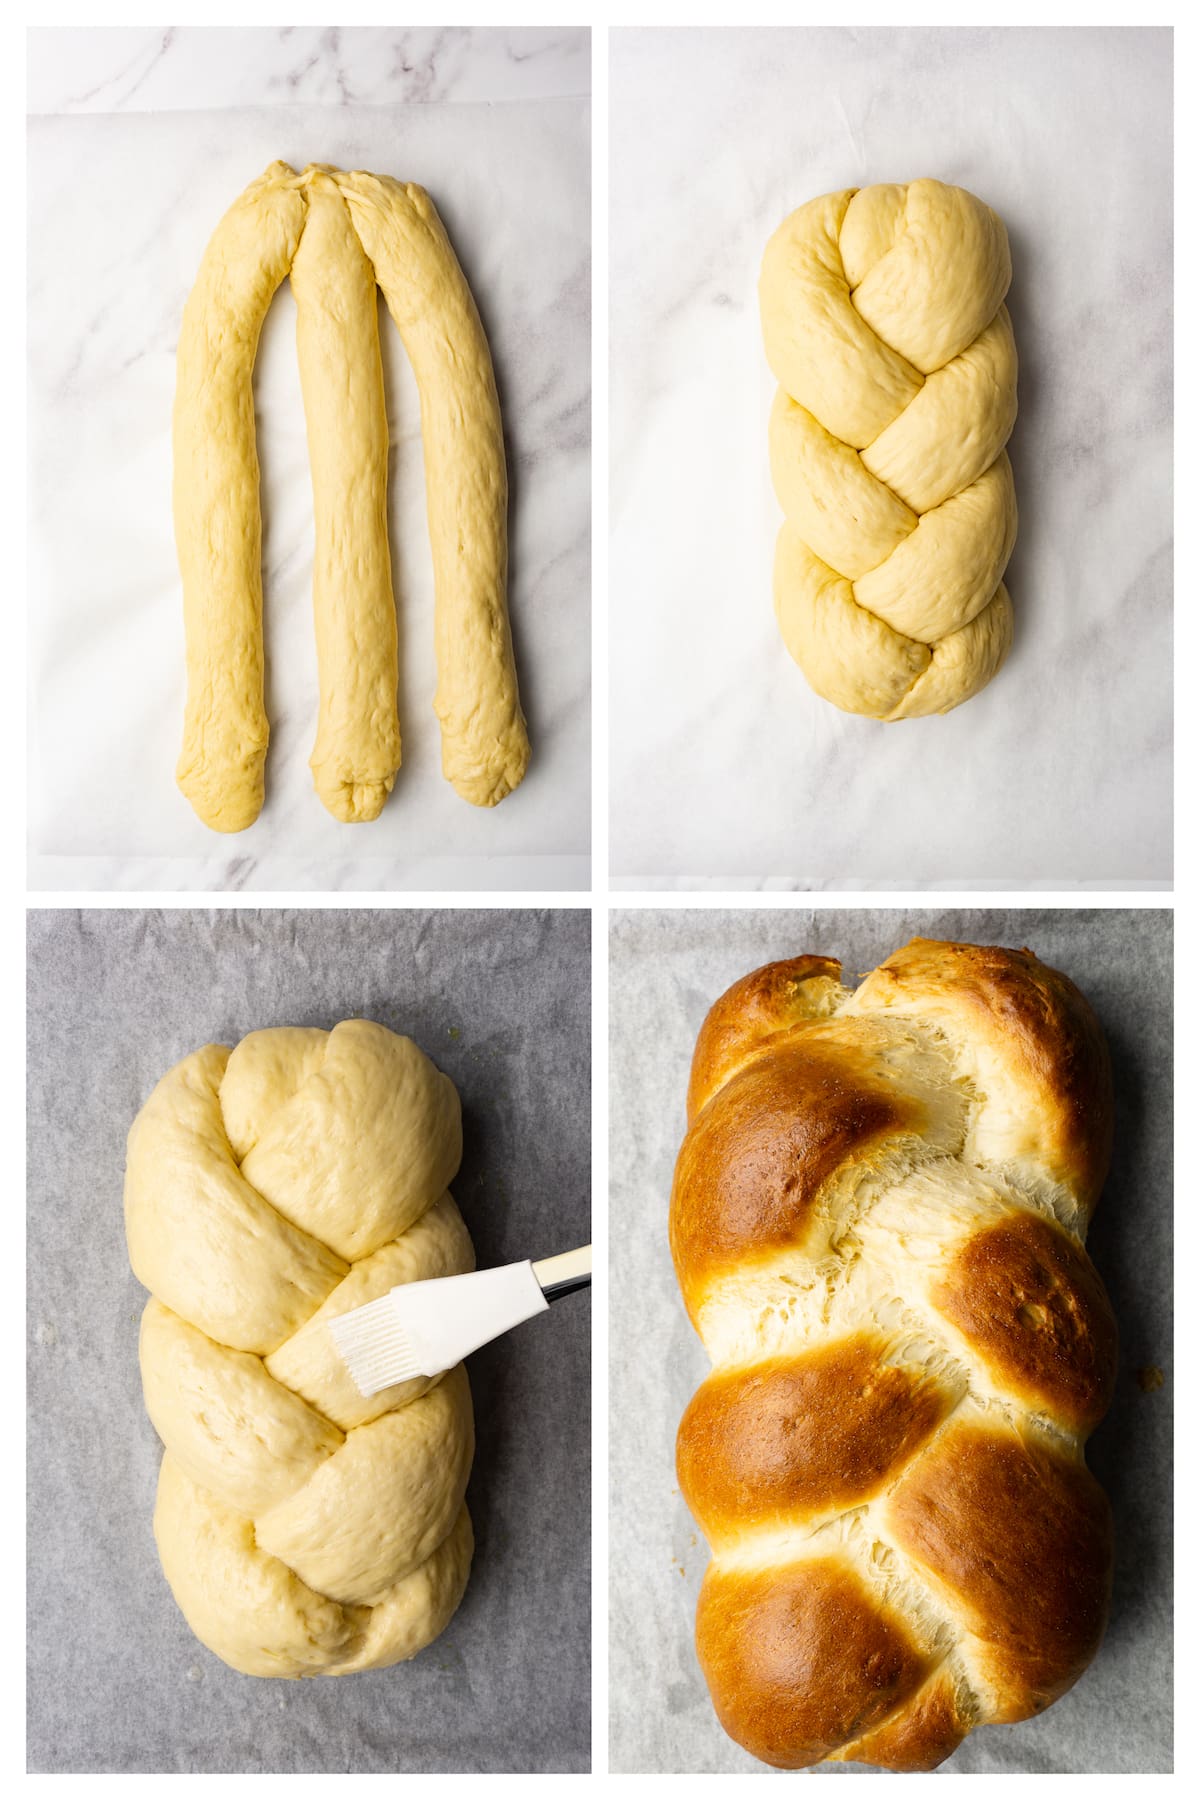 The collage image shows four steps to braid and bake challah bread.